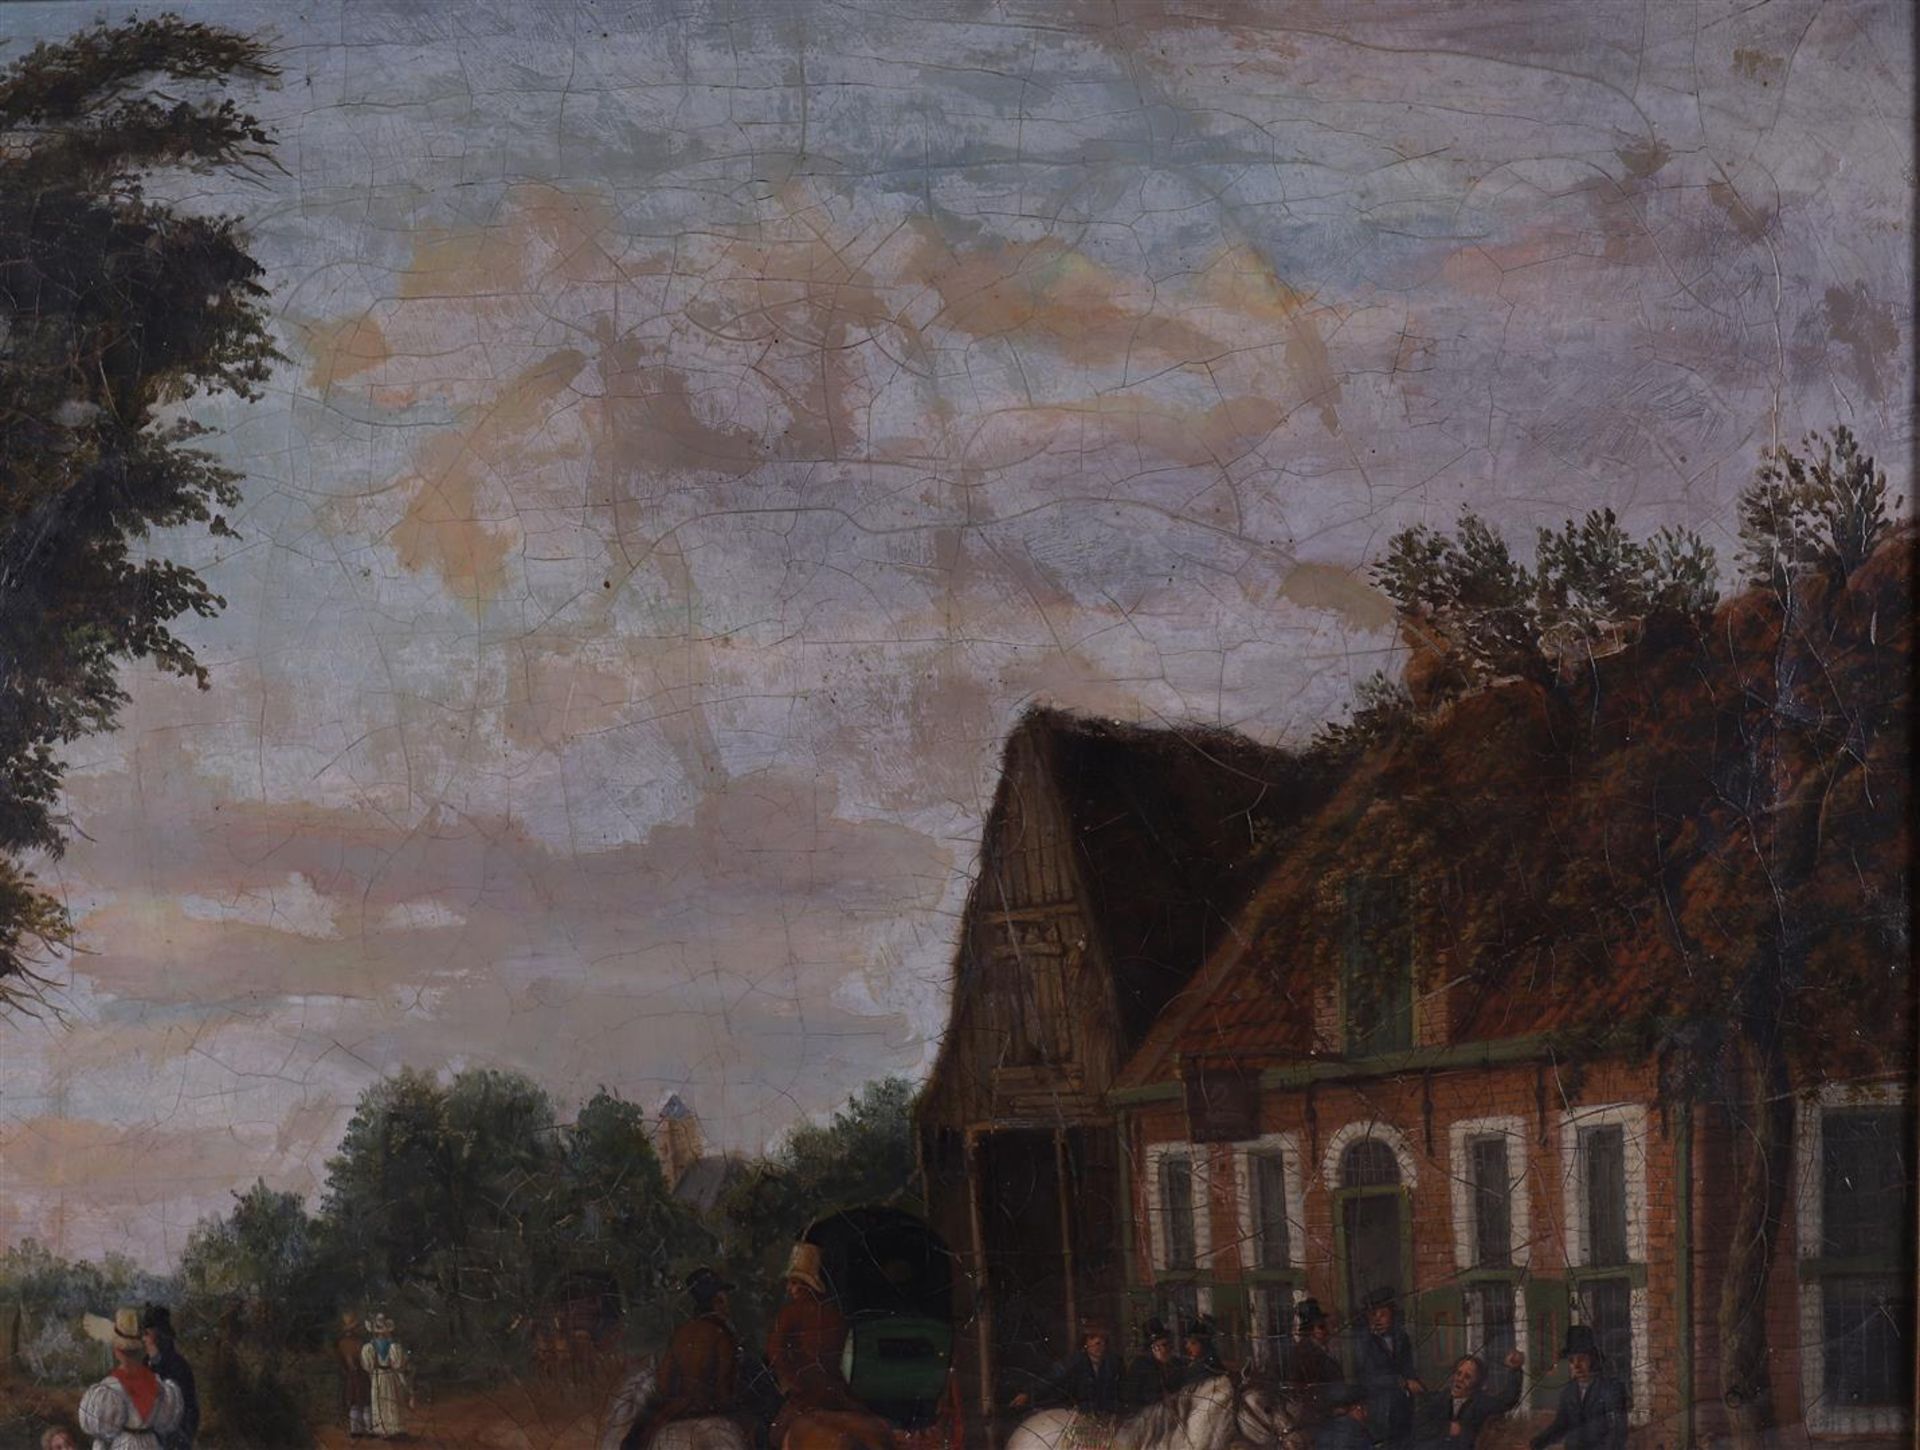 Postma, Derk Jacobs (1787-1866) "Company with carriages at an inn", ca. 1833, signed with monogram - Image 3 of 6